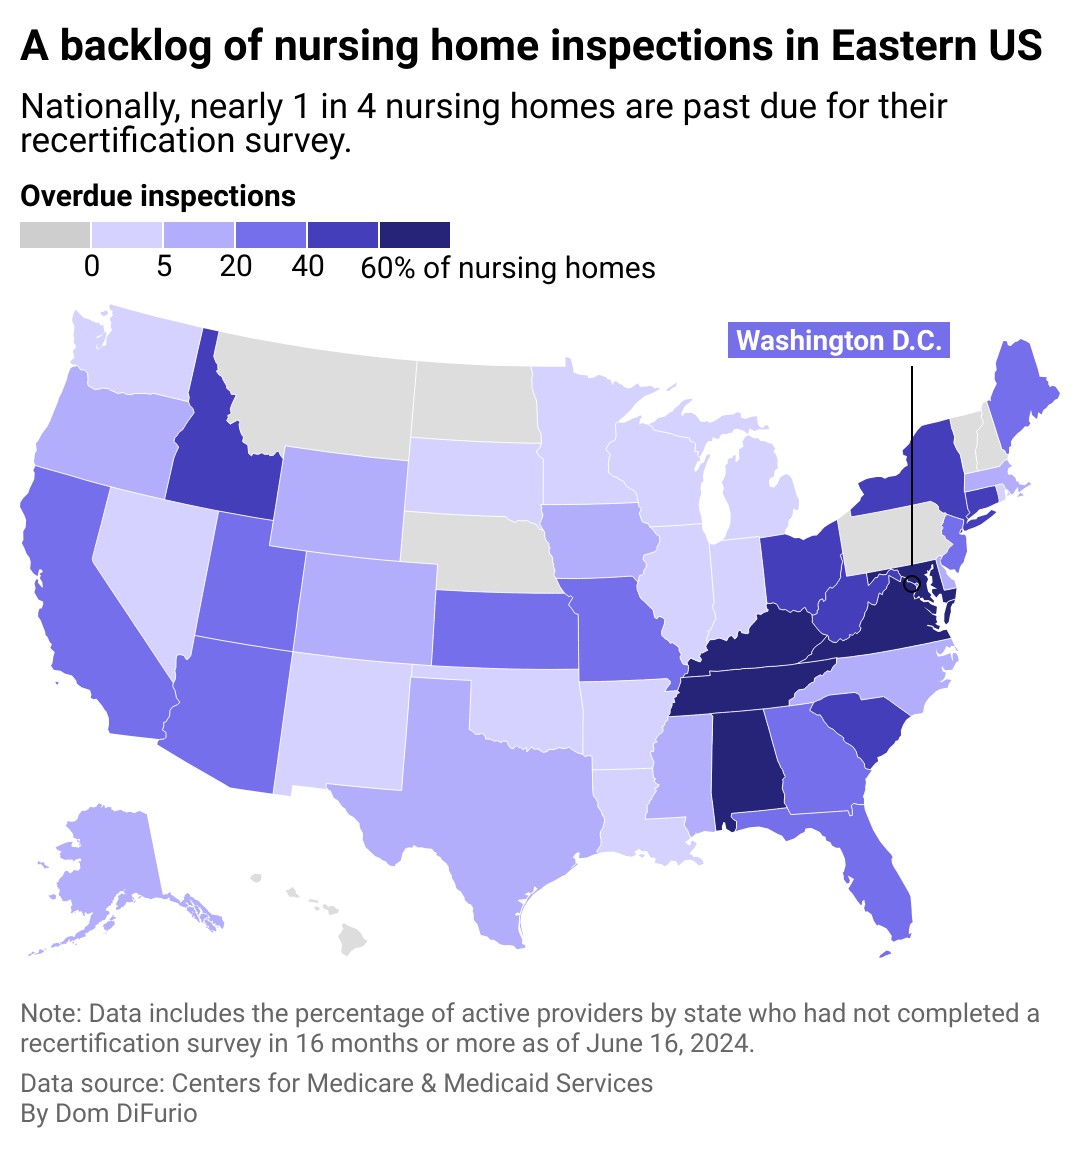 A map of the US with states showing as darker colors if the percentage of nursing homes in the state that haven